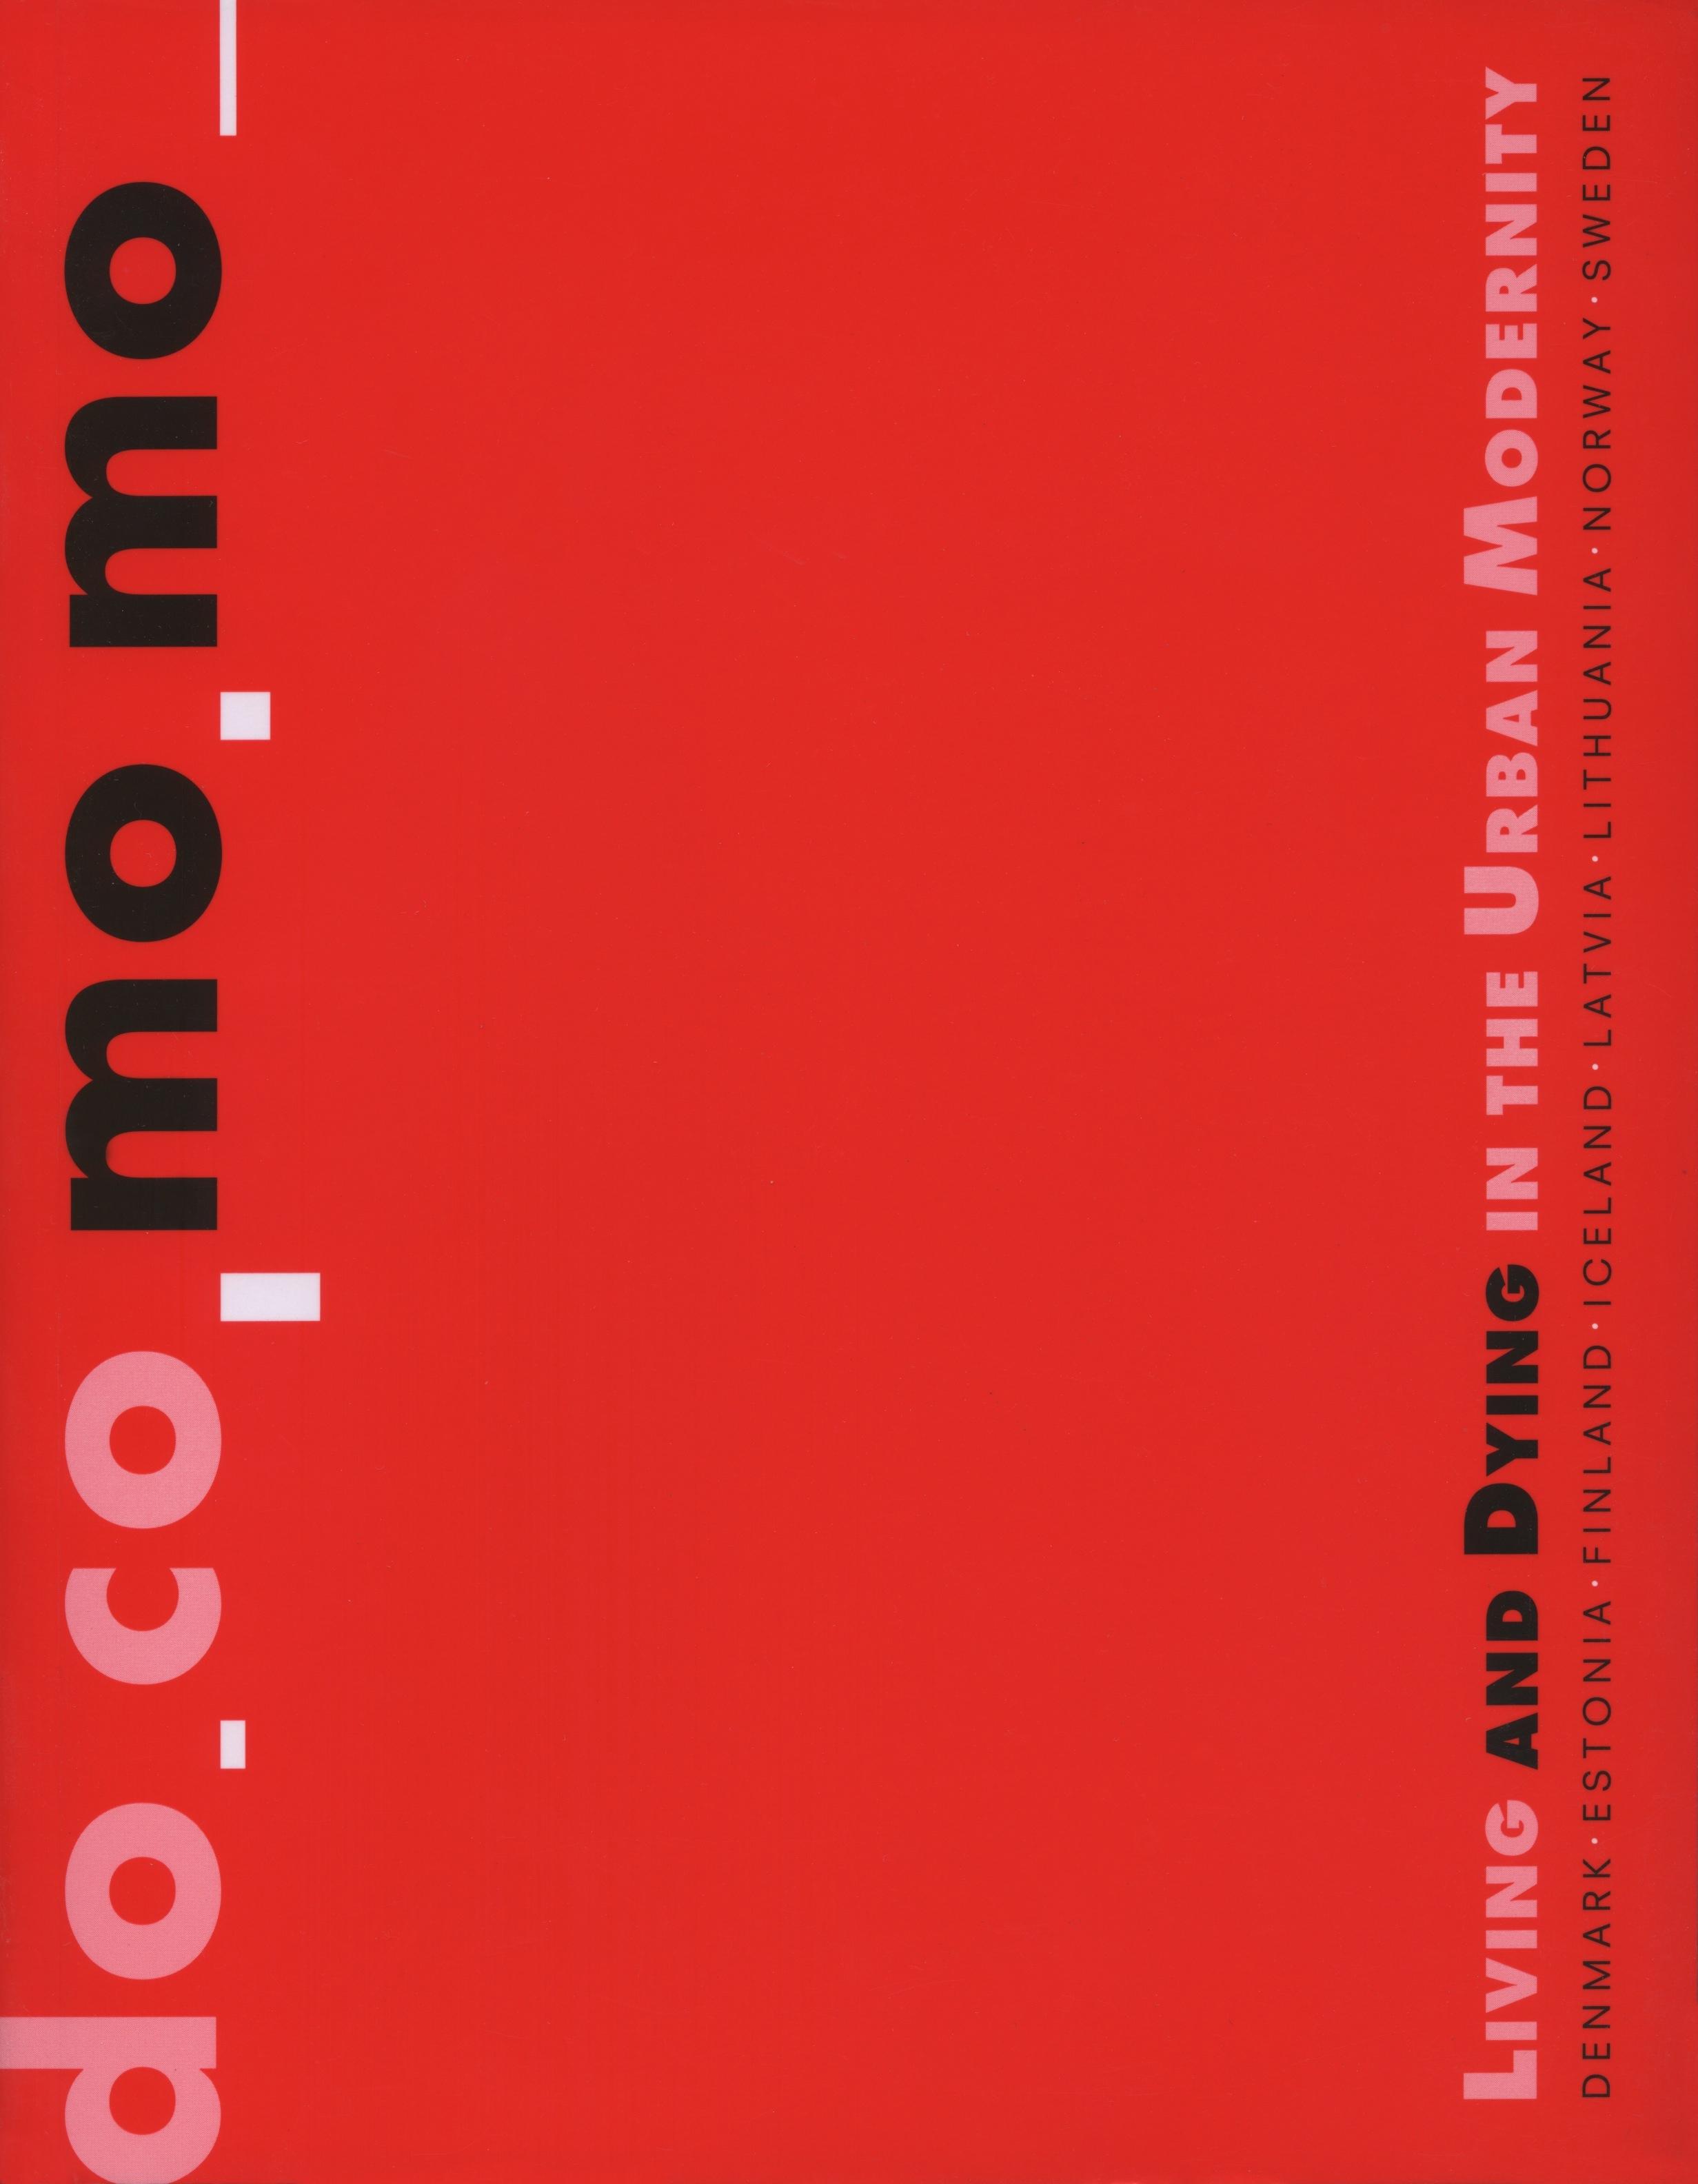 DOCOMOMO. LIVING AND DYING IN THE URBAN MODERNITY "DENMARK, ESTONIA, FINLAND, ICELAND, LATVIA, LITHUANIA, NORWAY, SWEDEN"